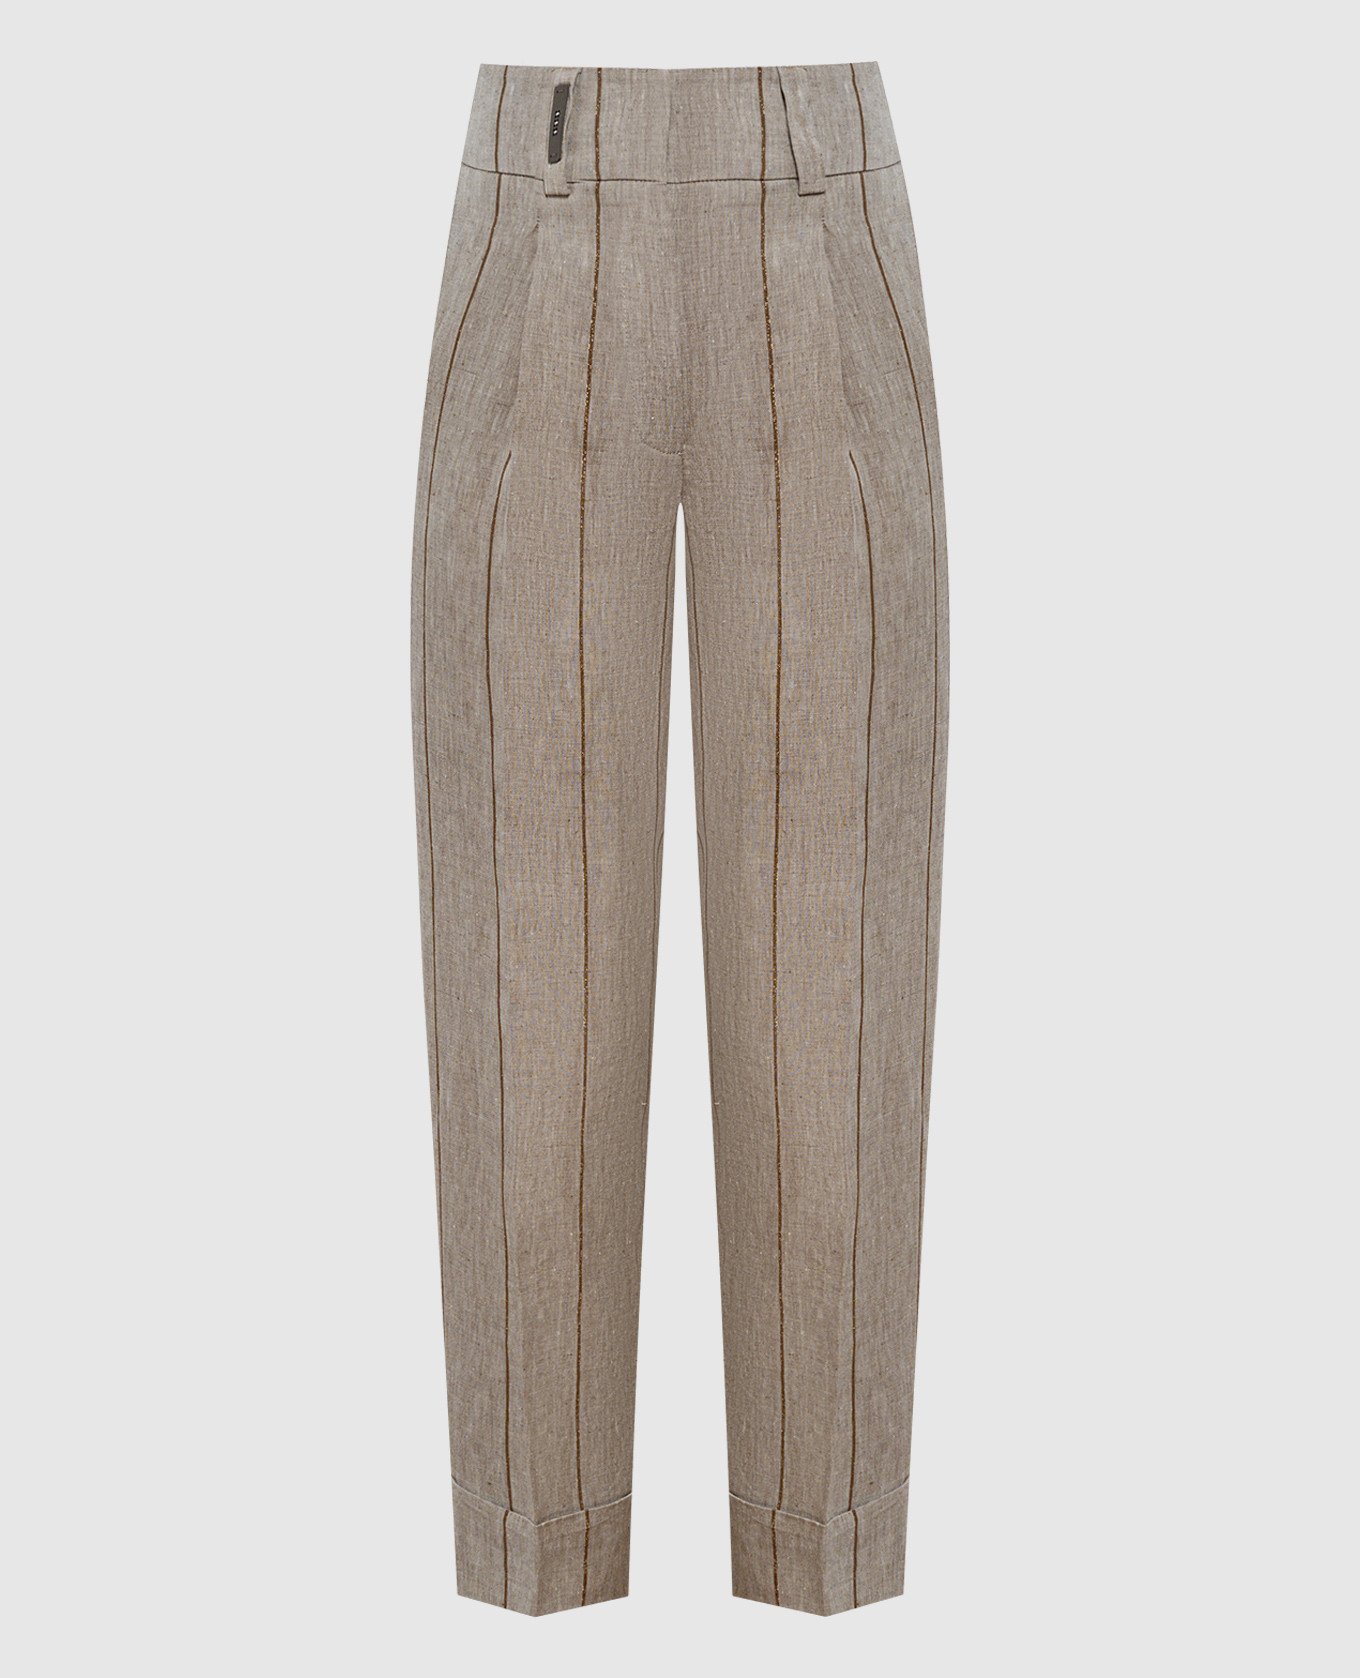 Brown striped linen pants with monil chain